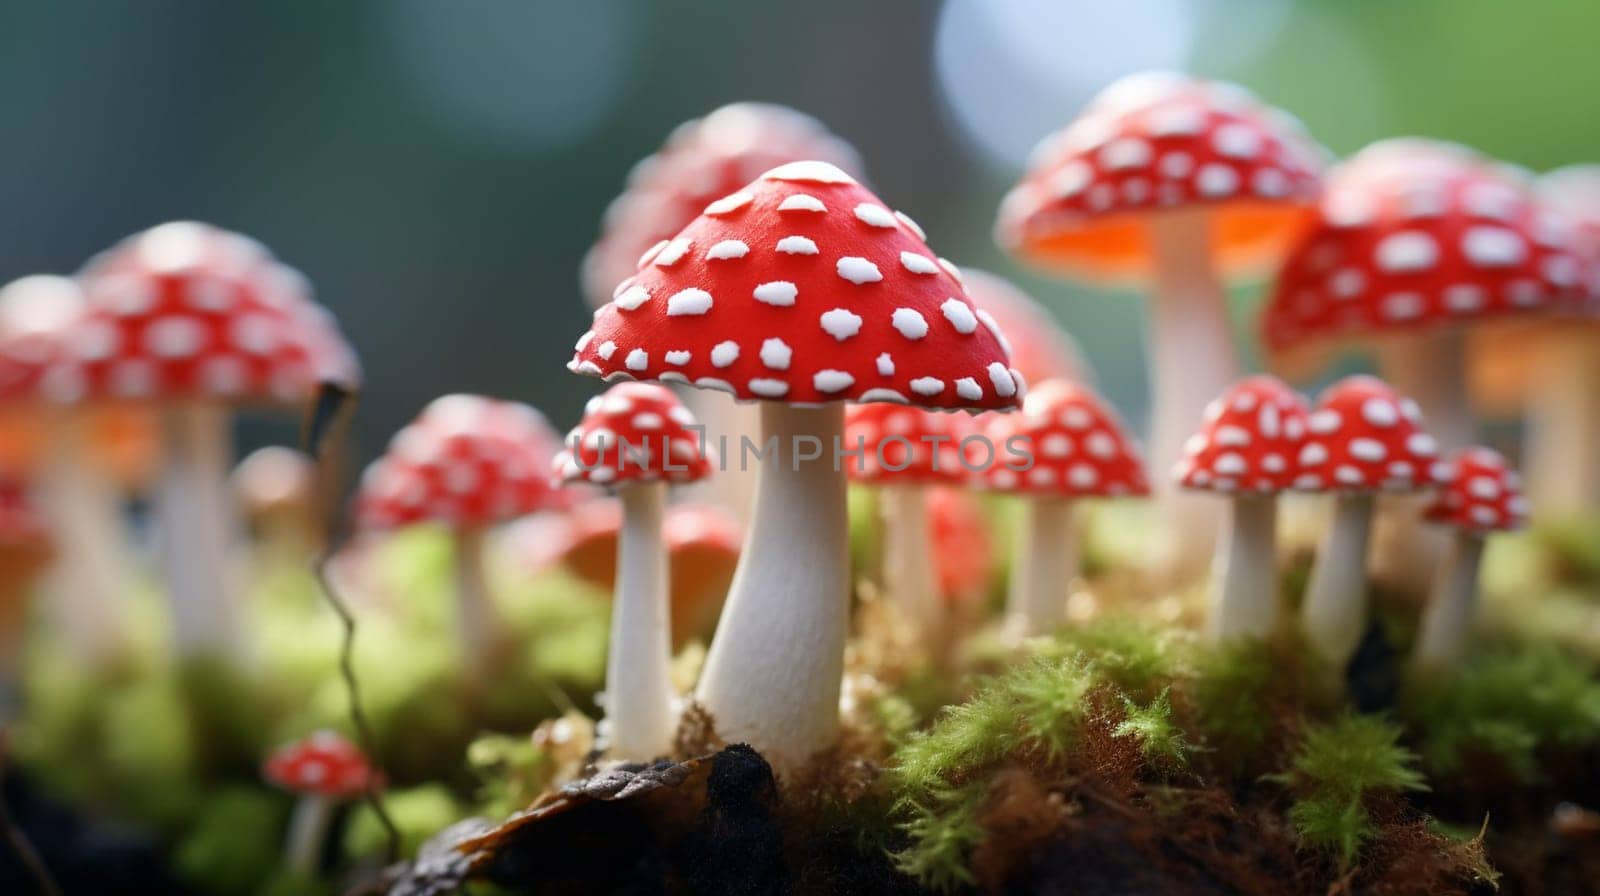 Red and white spotted mushrooms among forest foliage, displaying vivid colors and natural surroundings by kizuneko